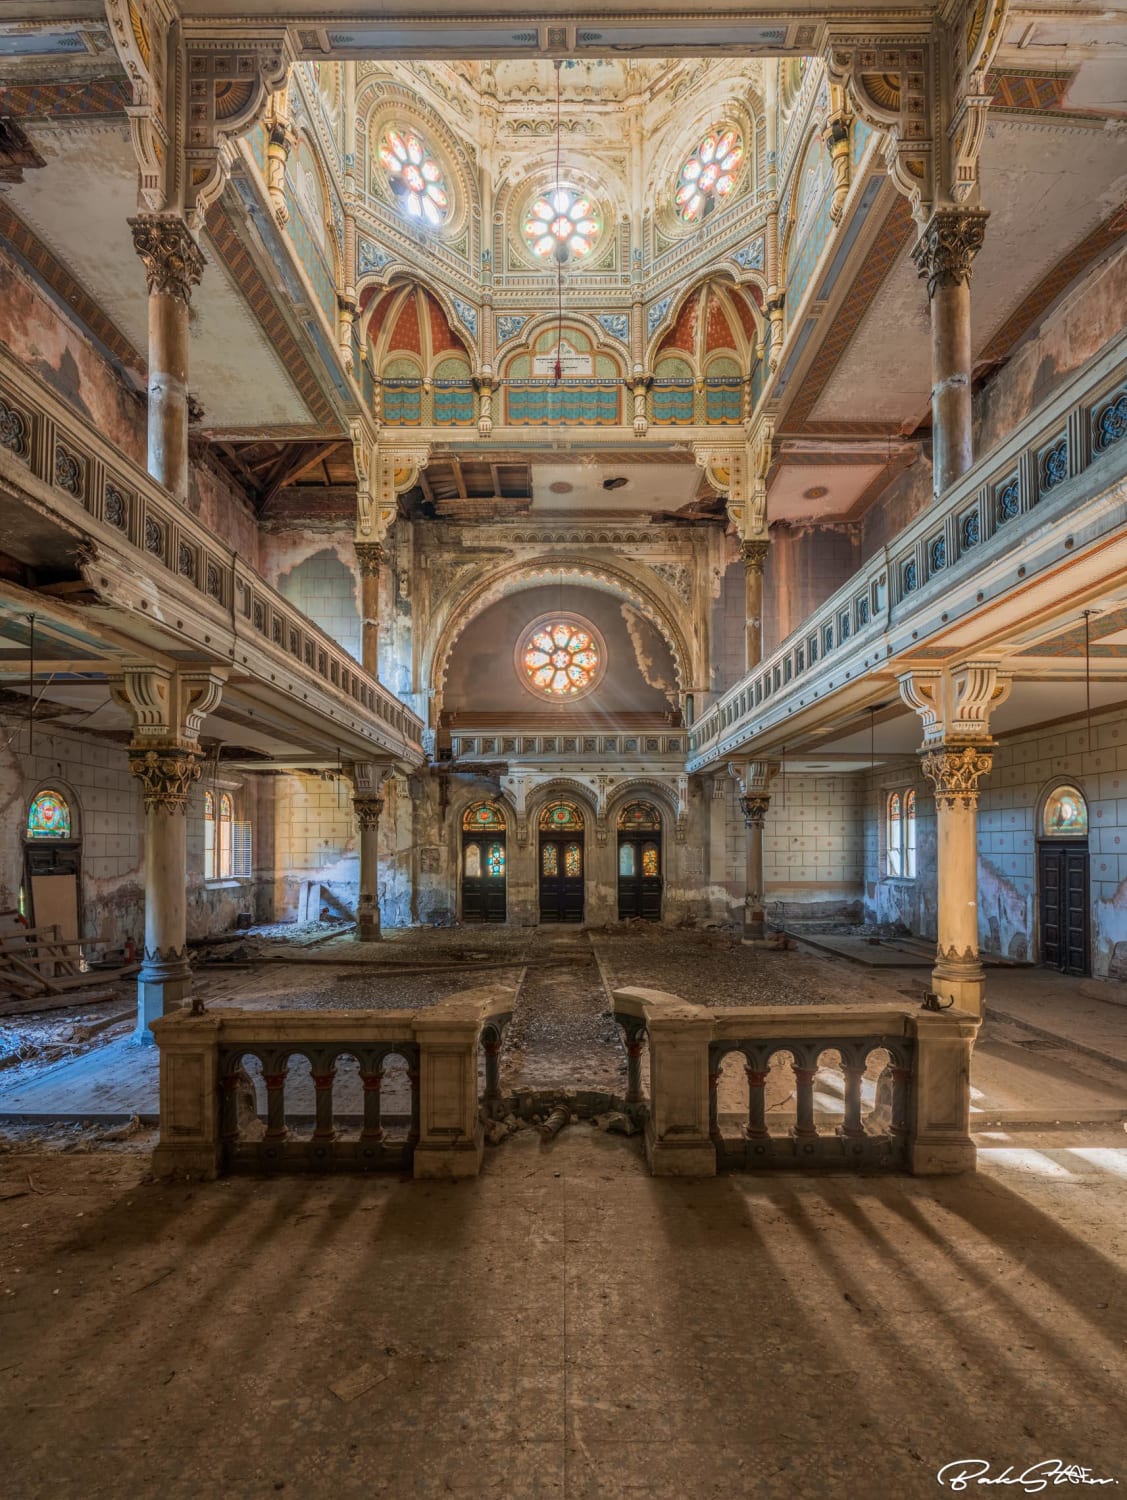 This synagogue has been abandoned for over 30 years.